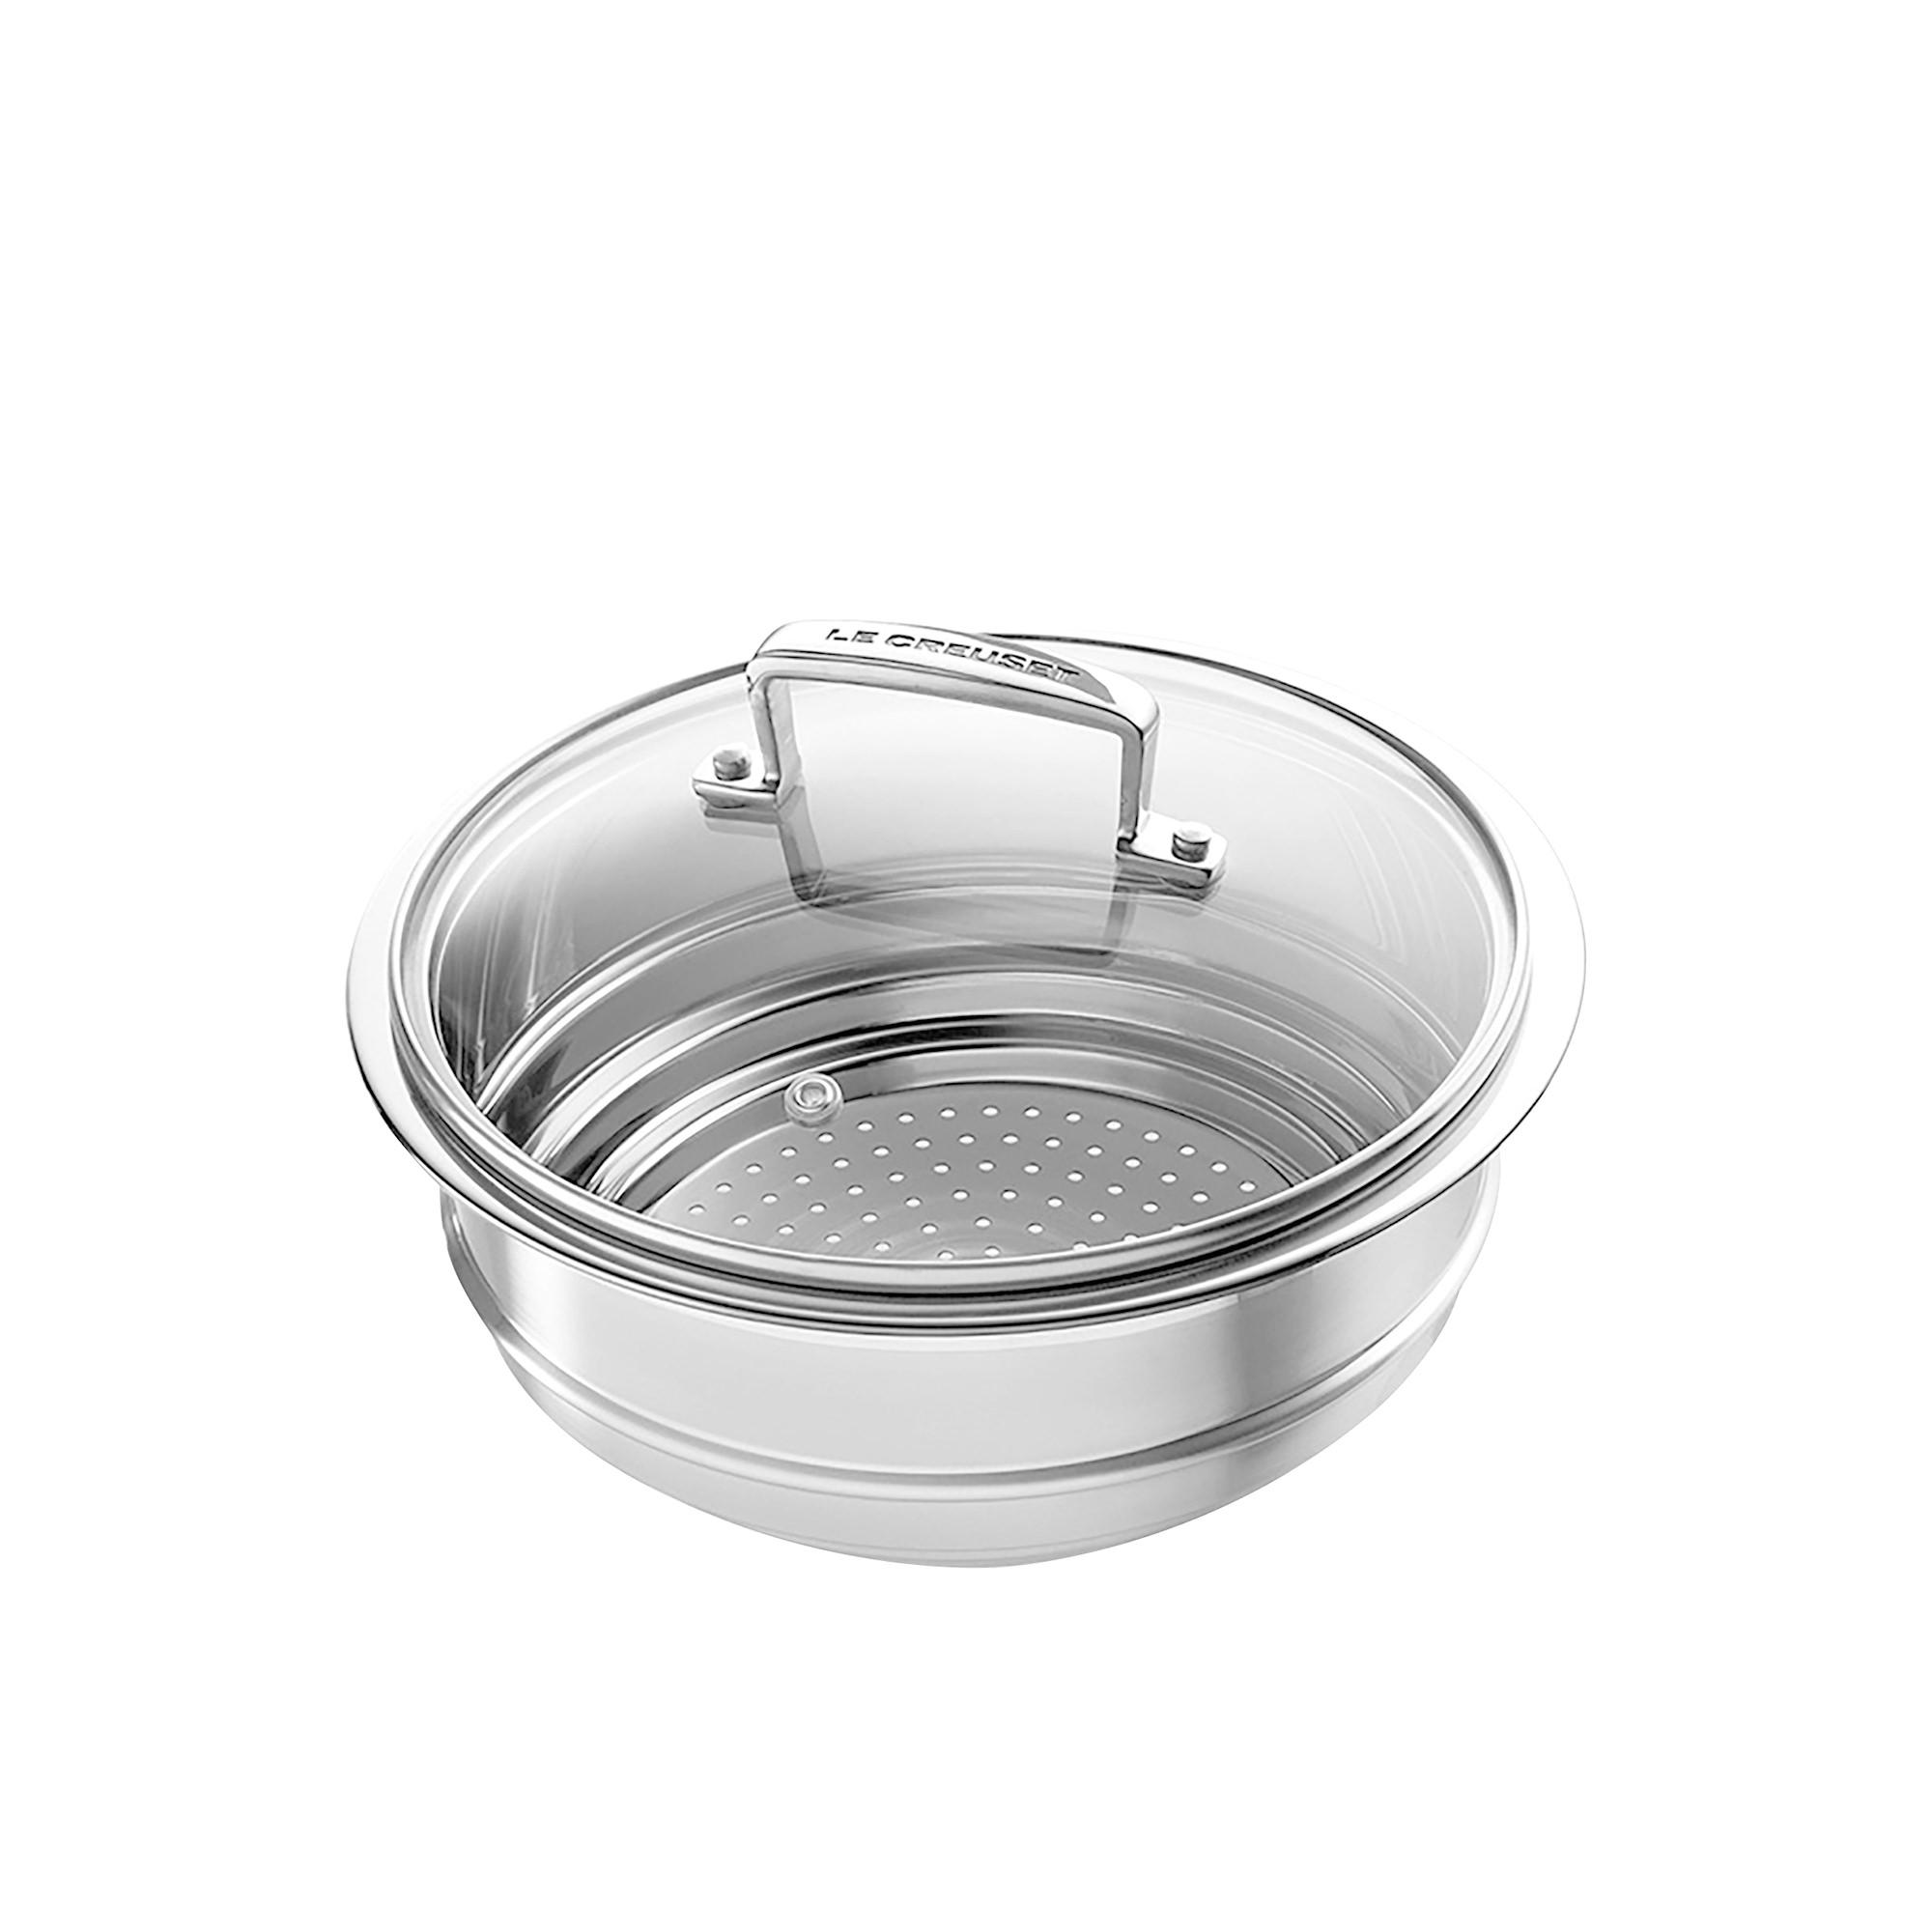 Le Creuset 3-Ply Stainless Steel Multi Steamer with Glass Lid Image 1